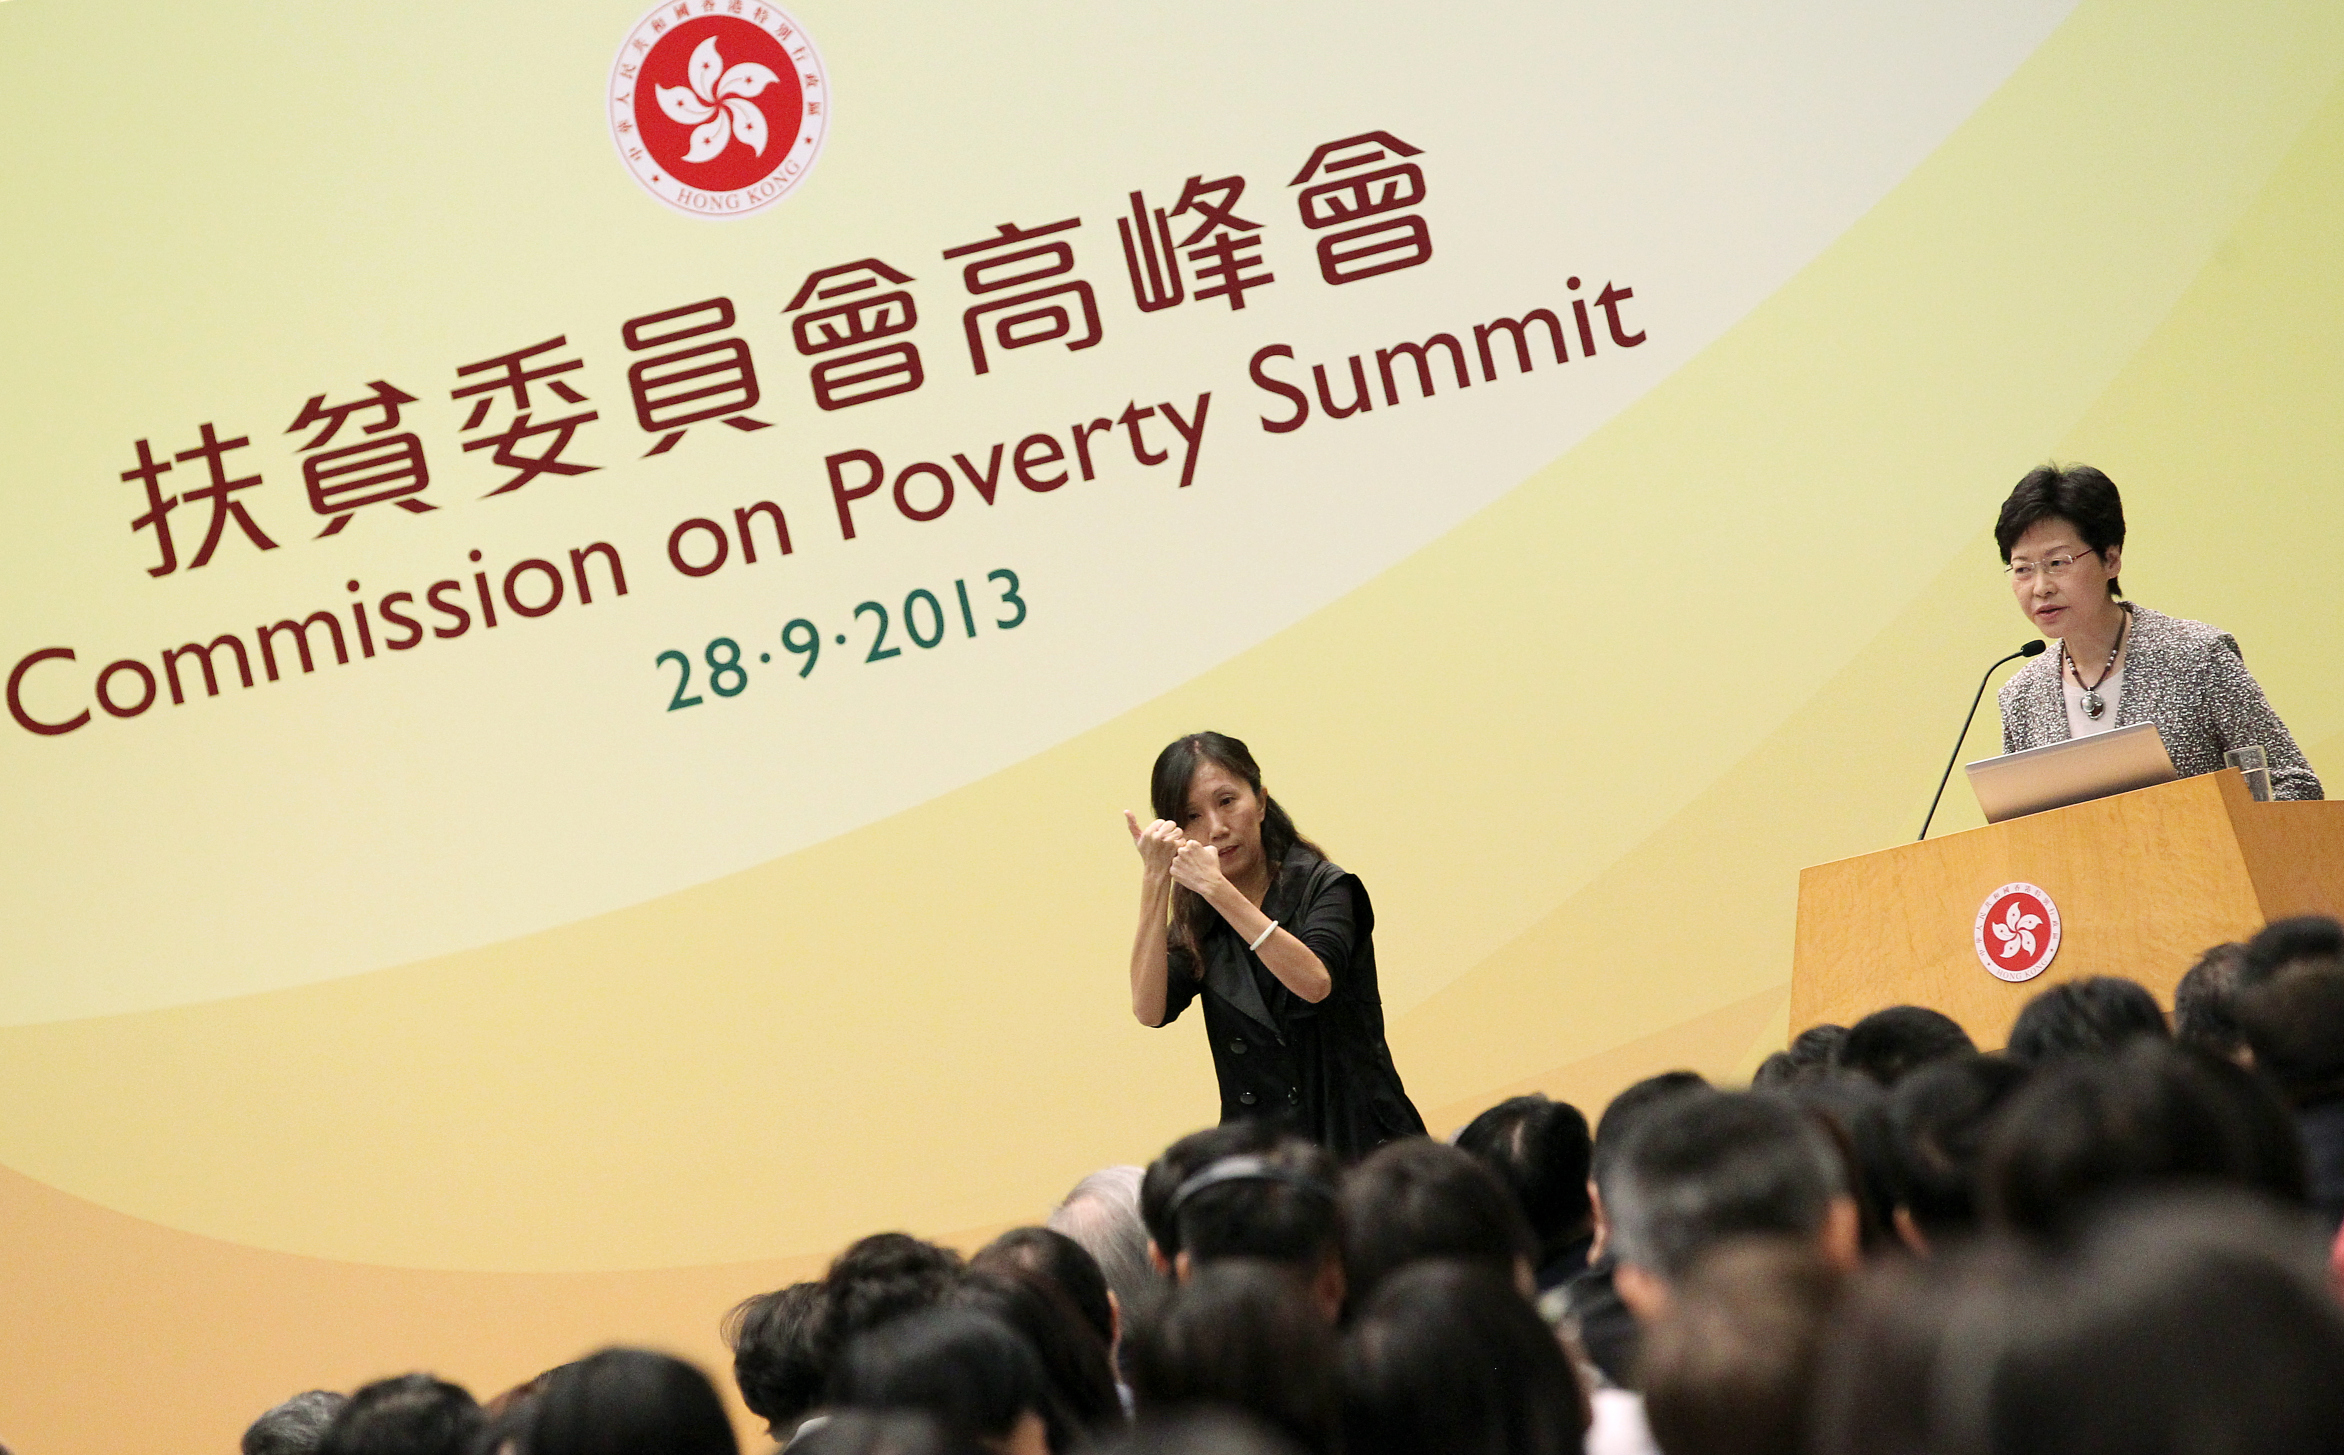 Chief Secretary Carrie Lam Cheng Yuet-ngor speaks at the Commission on Poverty Summit. Photo: K.Y. Cheng